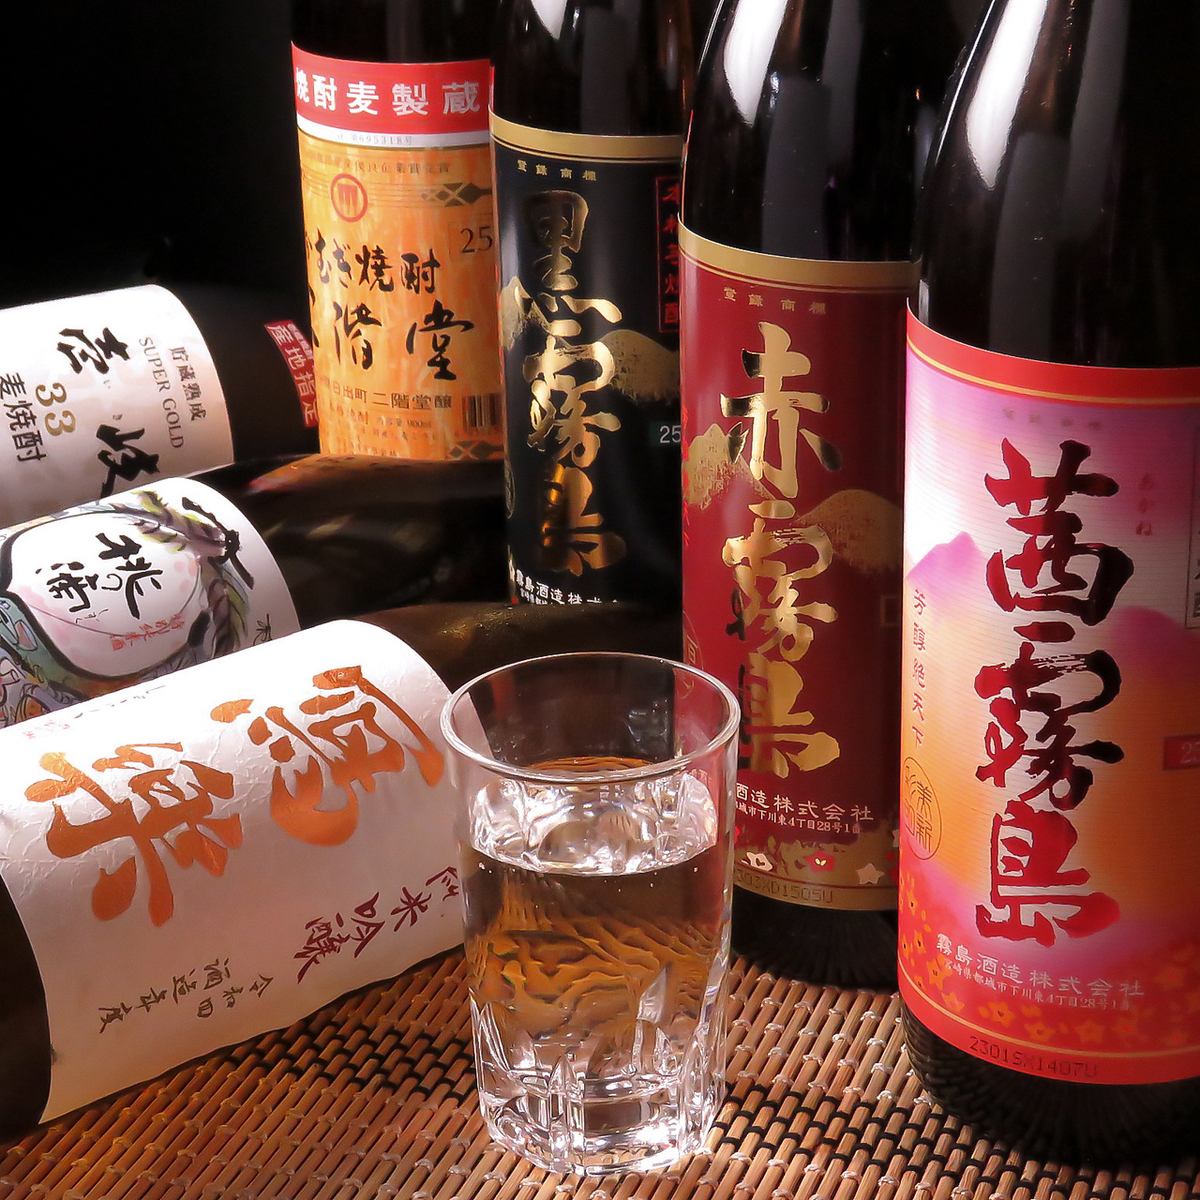 A wide variety of sake, shochu, whiskey, etc. that are not on the menu ♪